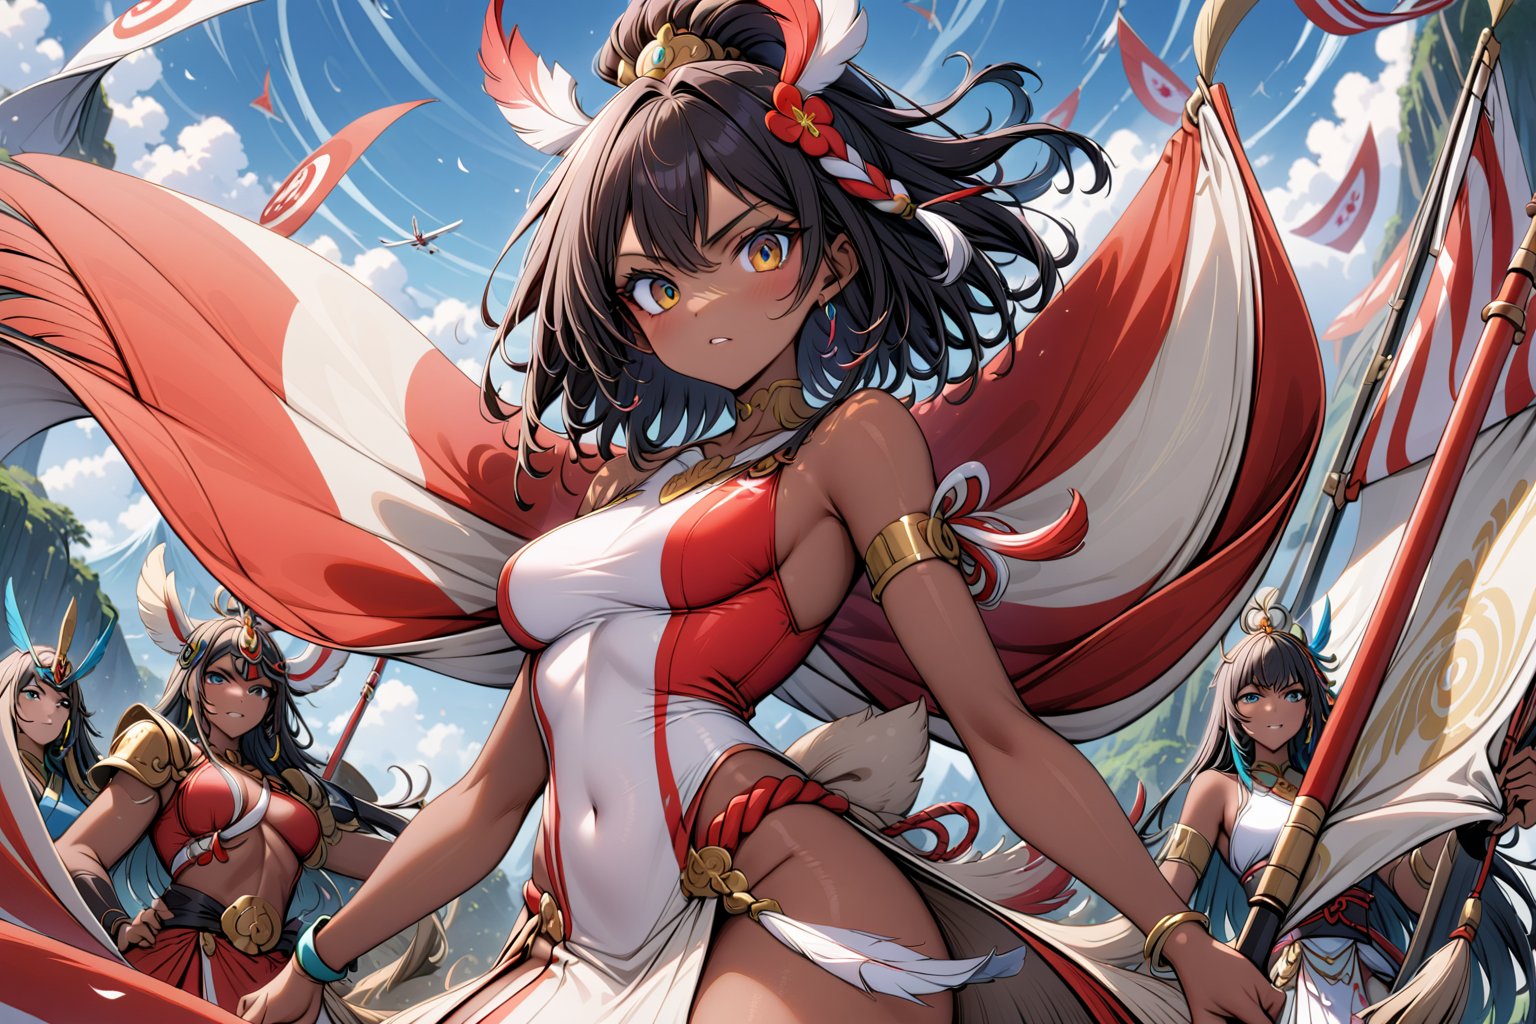 cenital plane, skin flag of Perú perfect and detail, person with the flag of Perú in the background, epic, Dark skin,
,SakayanagiArisu,Expressiveh,japanese_goddess